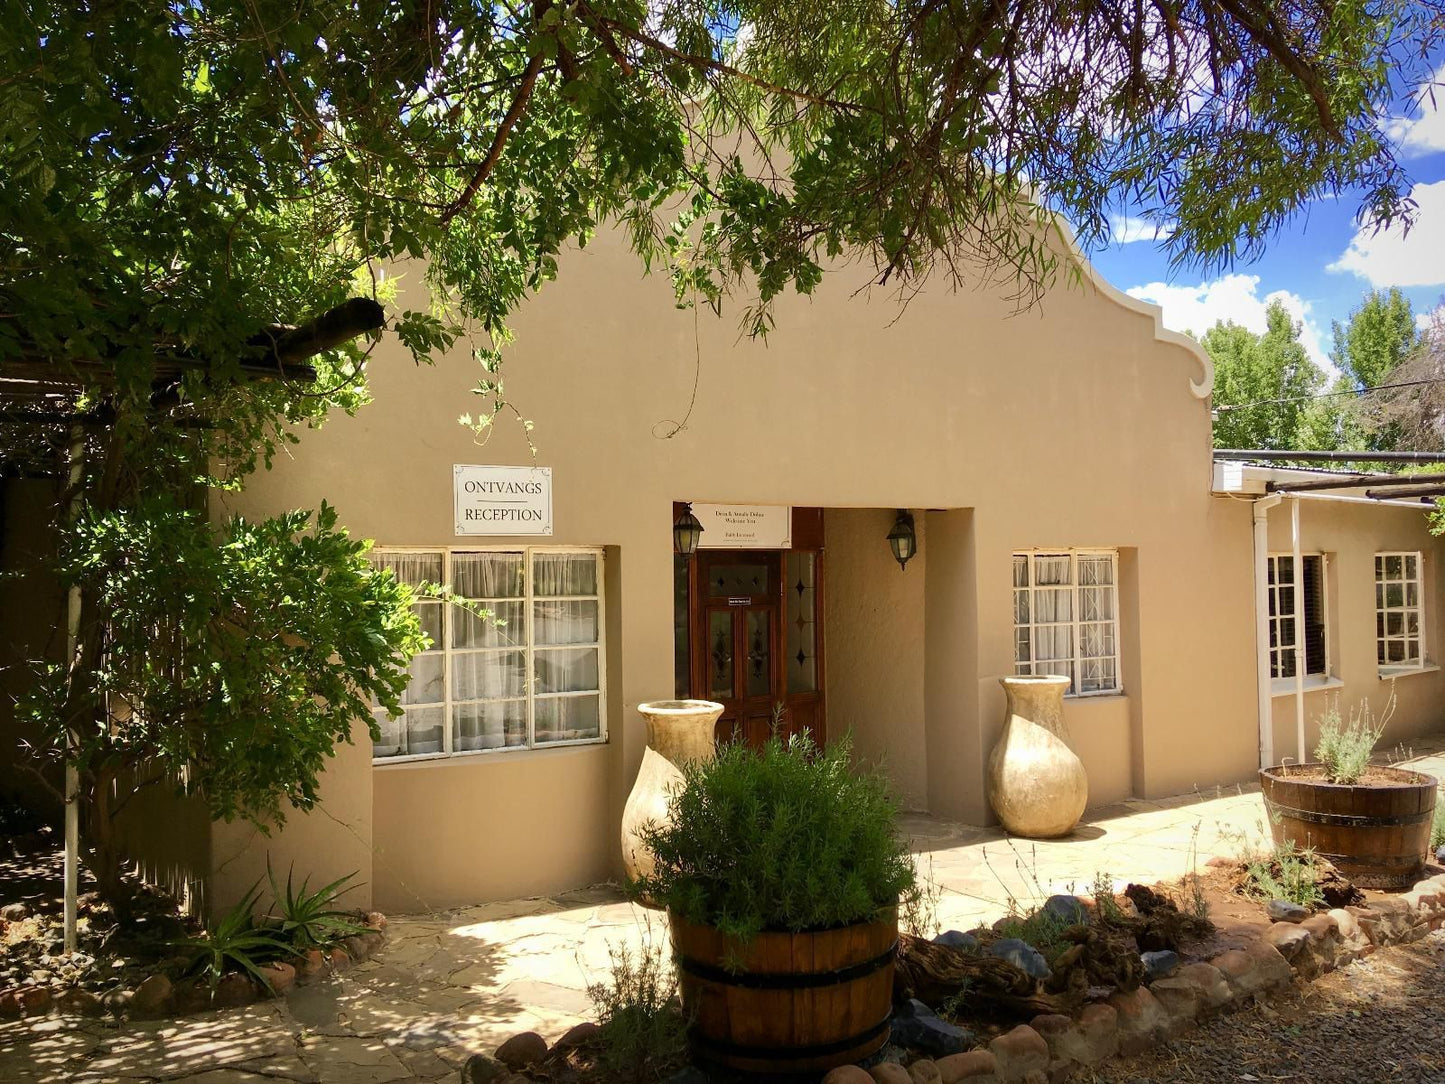 Van Zylsvlei Colesberg Northern Cape South Africa House, Building, Architecture